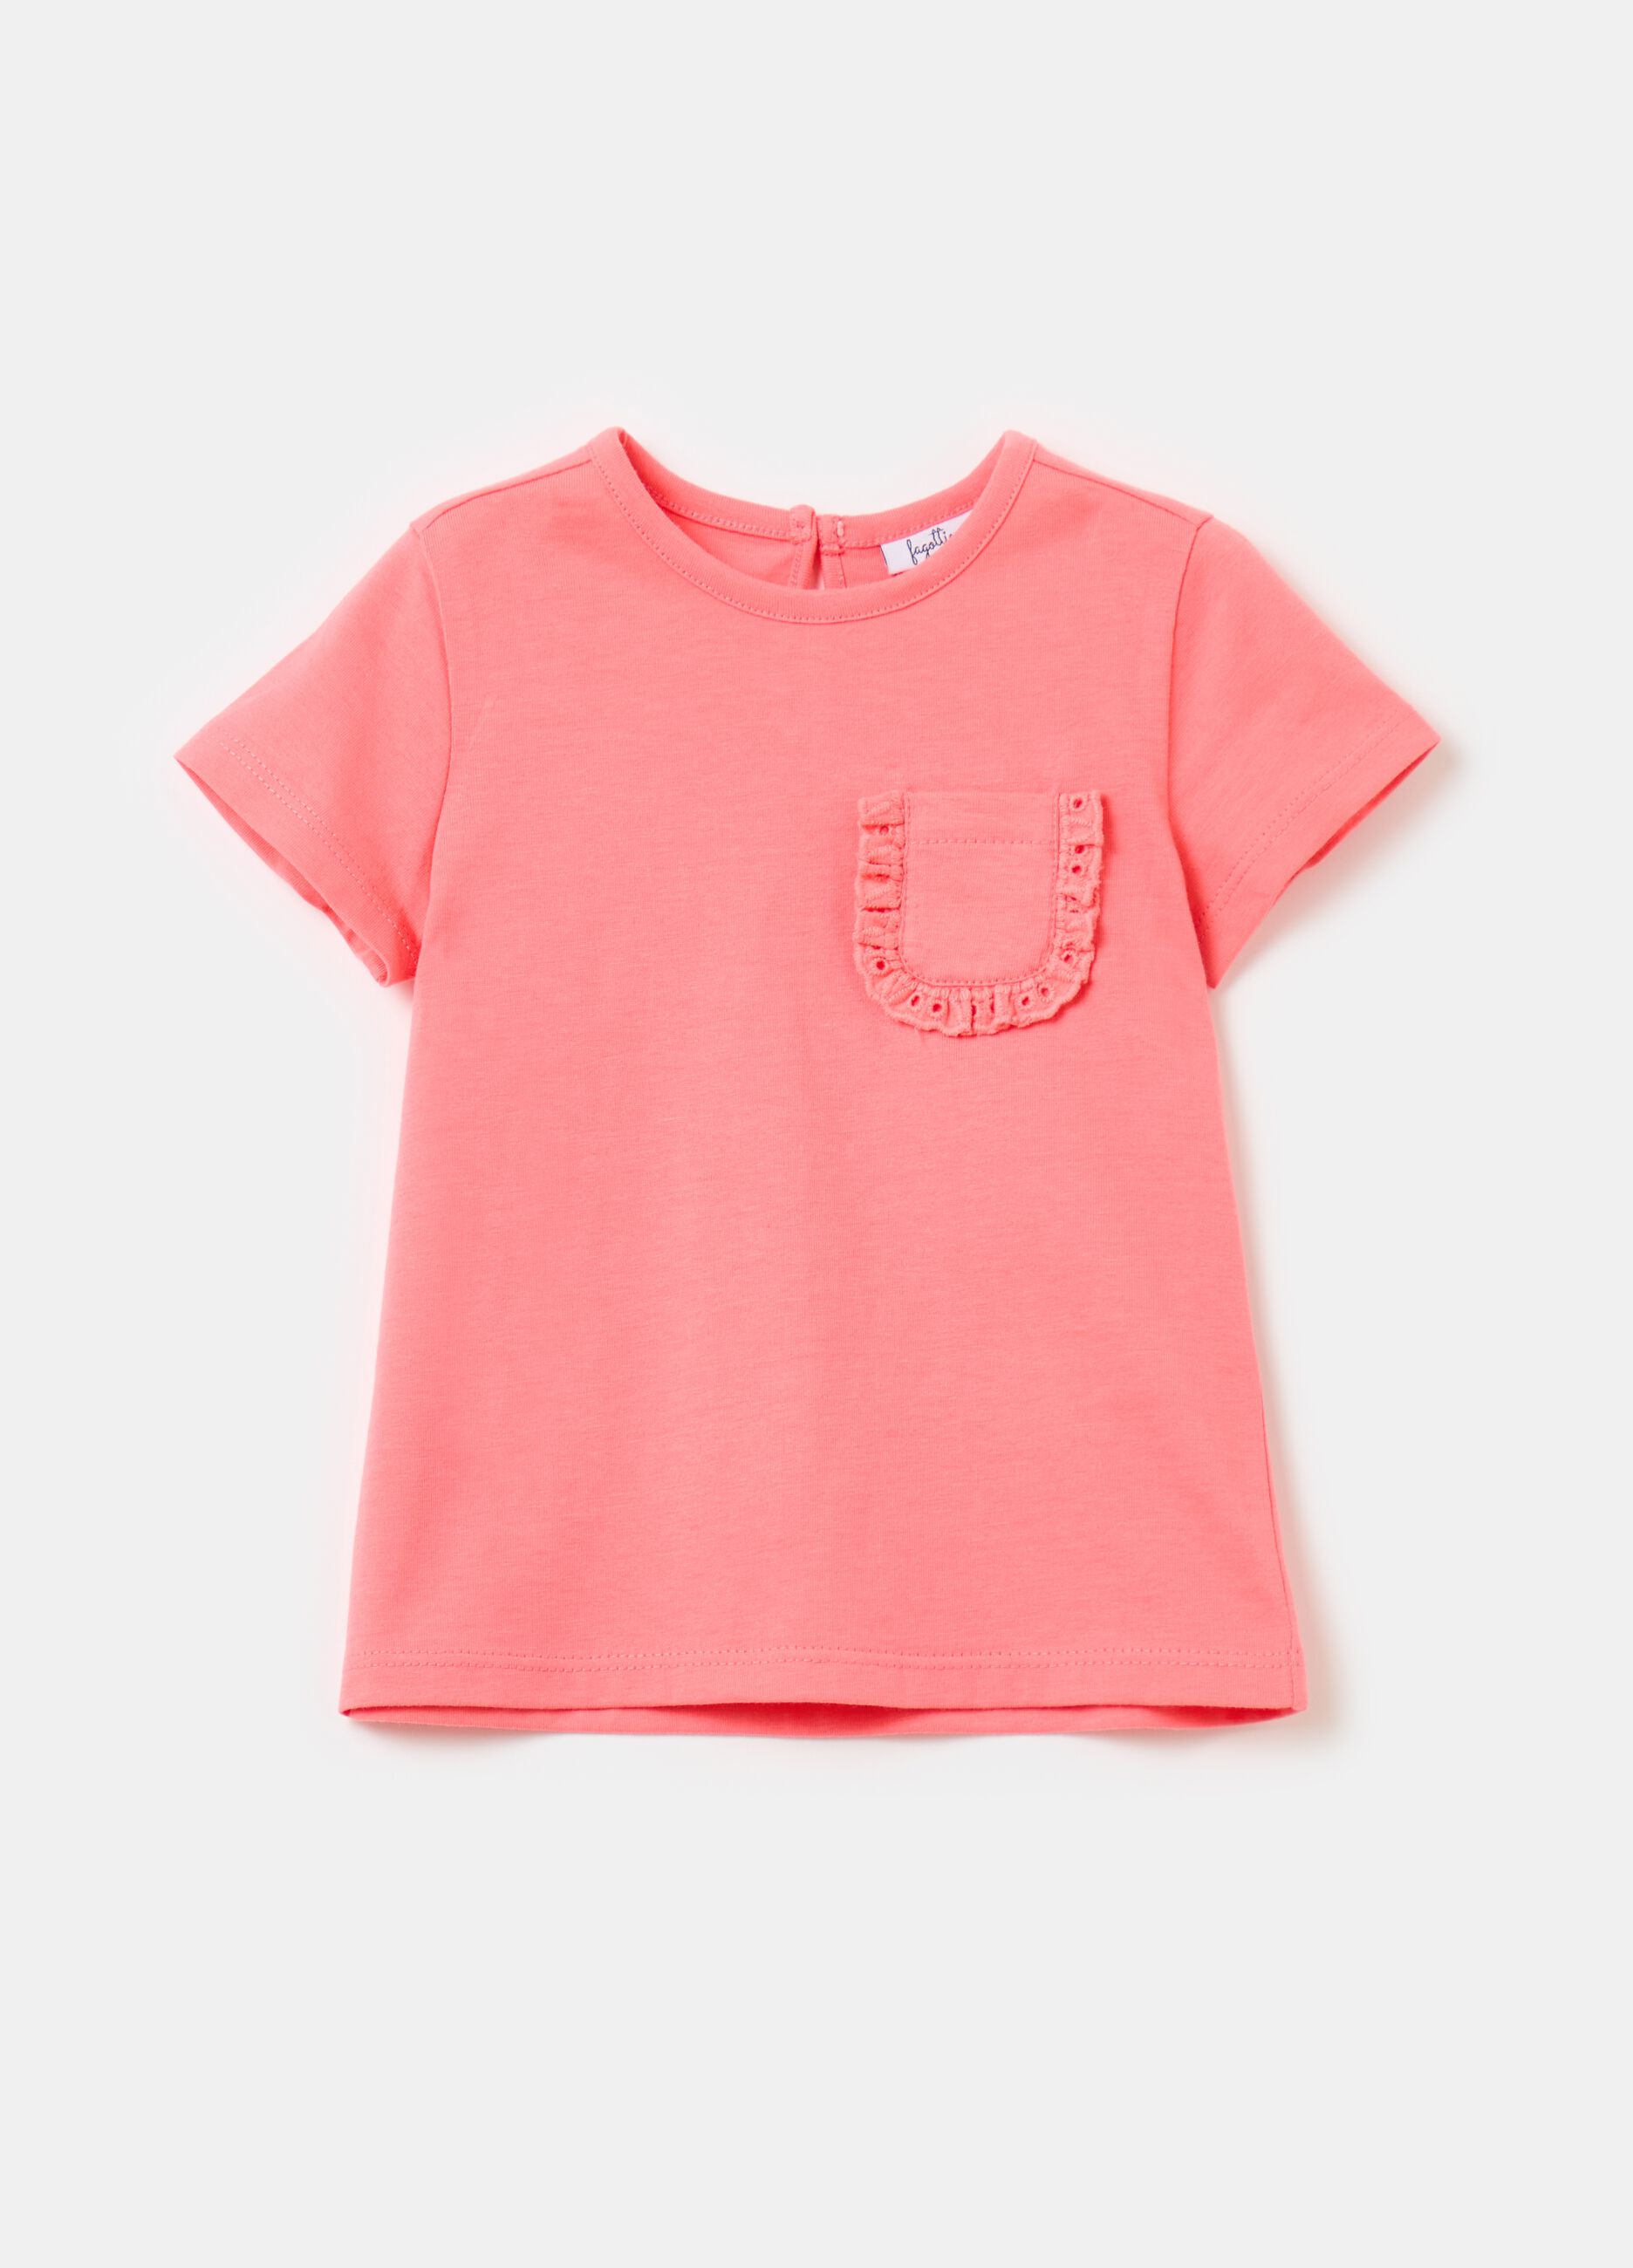 Cotton T-shirt with broderie anglaise detail